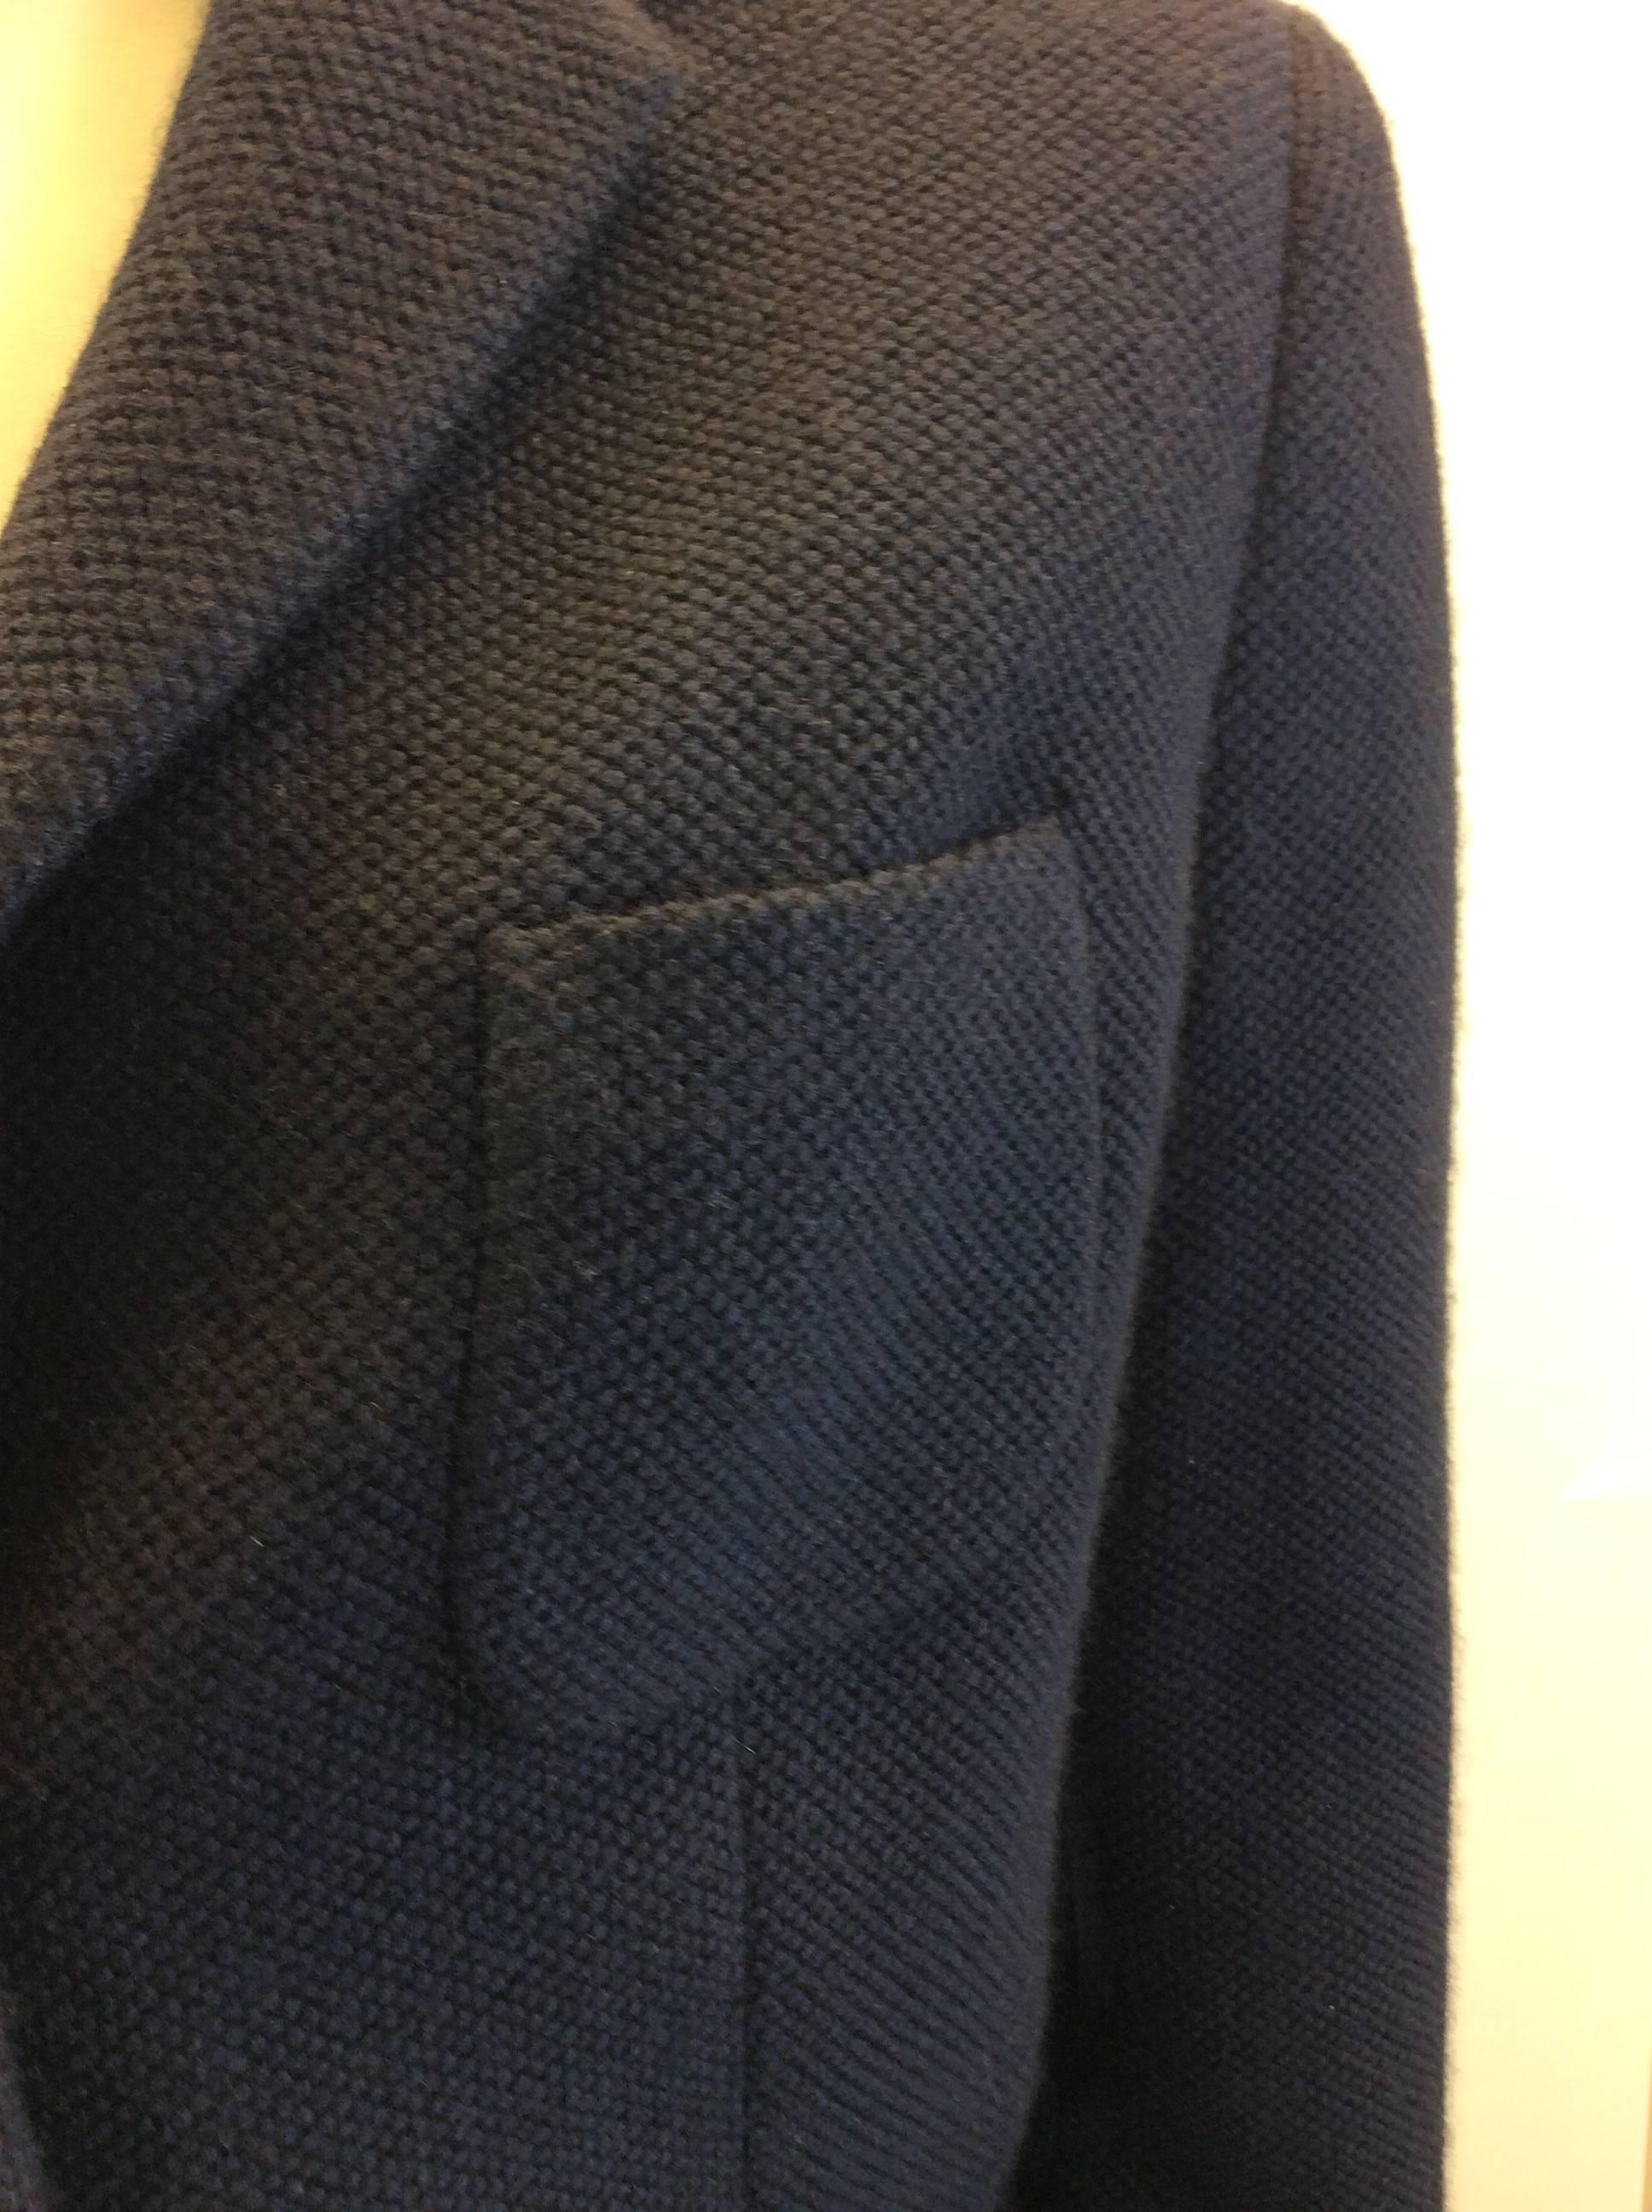 Loro Piana Navy Cashmere Blazer In Excellent Condition For Sale In Narberth, PA